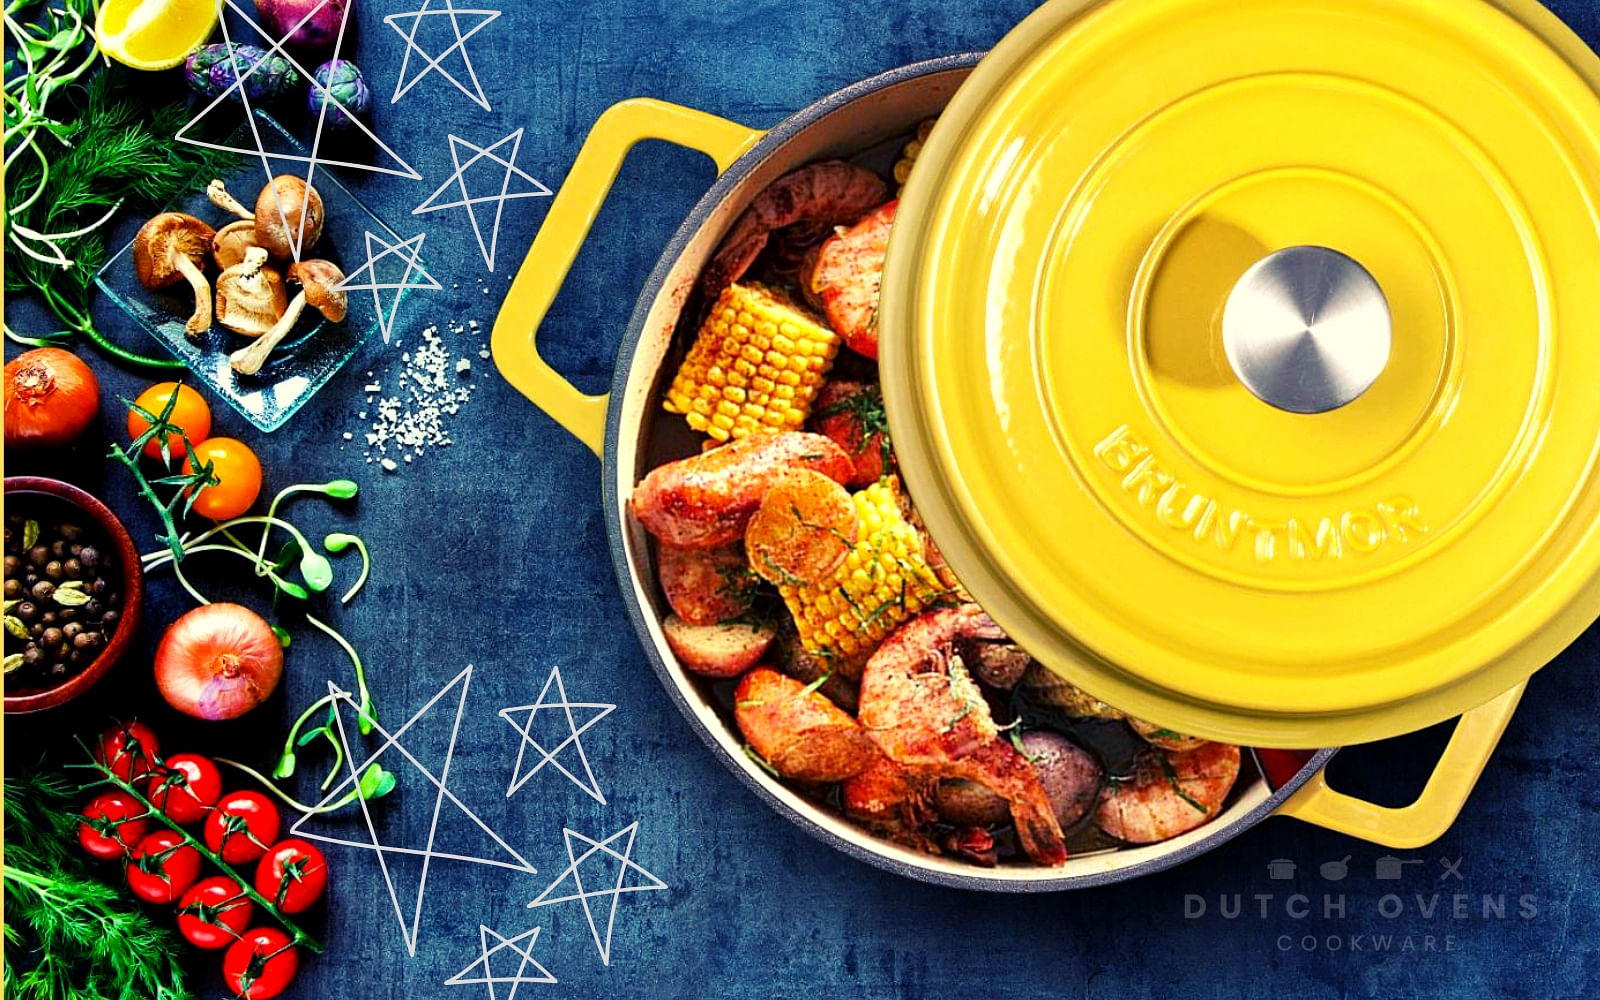 10 Things You Shouldn't Do With Your Dutch Oven